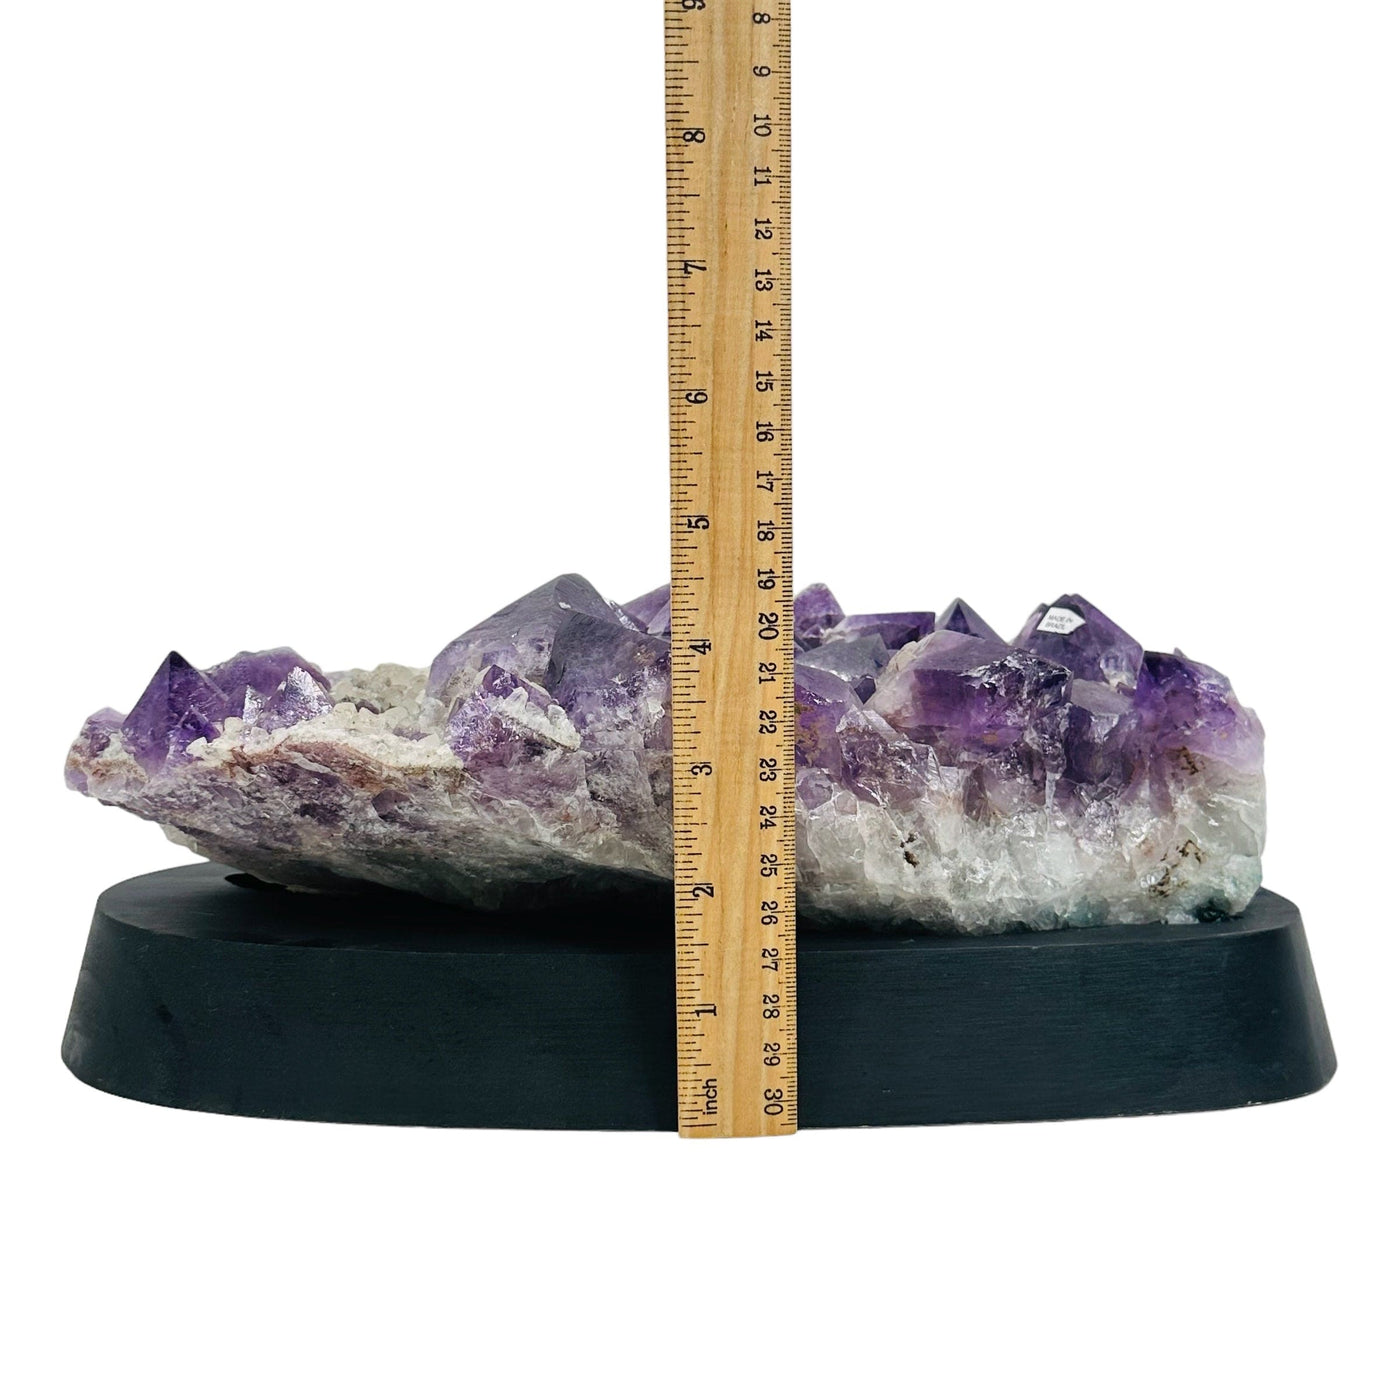 Amethyst Crystal Cluster on Wooden Base - Large Table Setting next to a ruler for size reference 